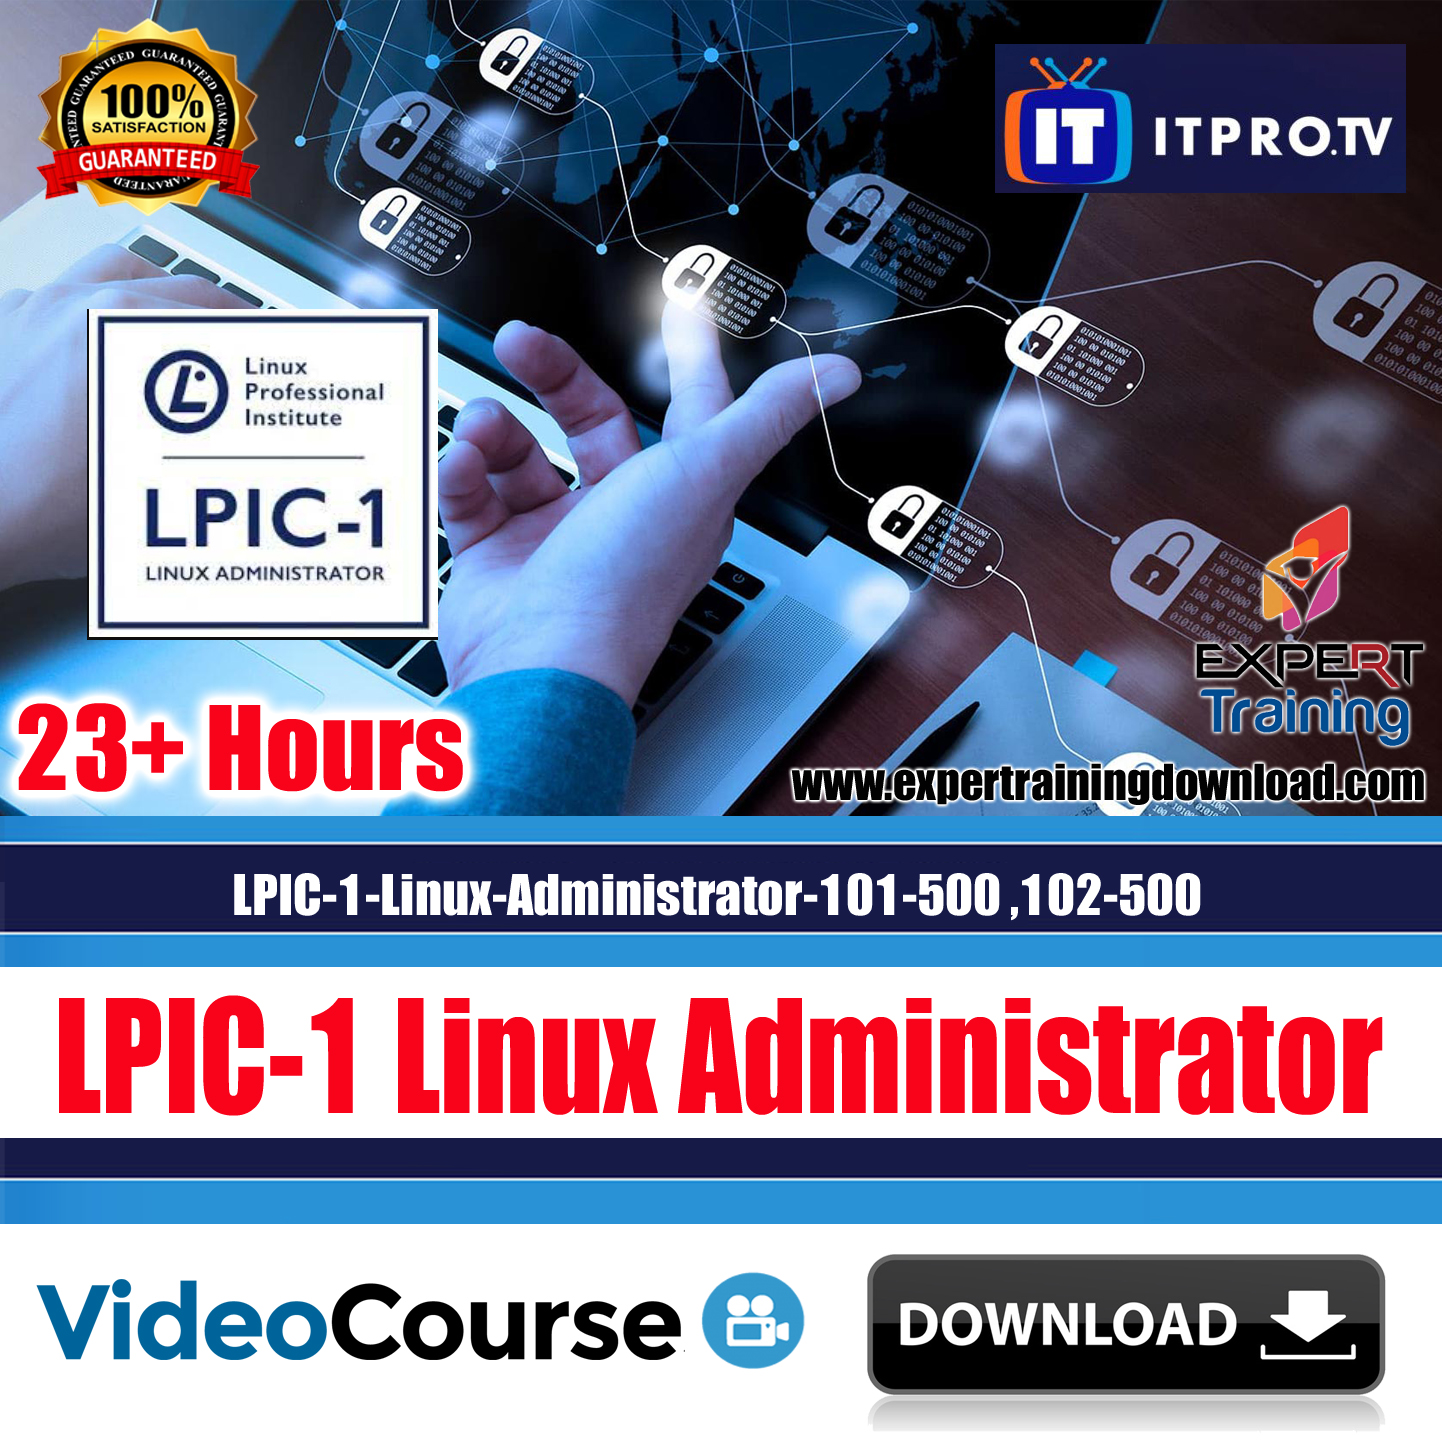 LPIC-1-Linux-Administrator-101-500 ,102-500 Course